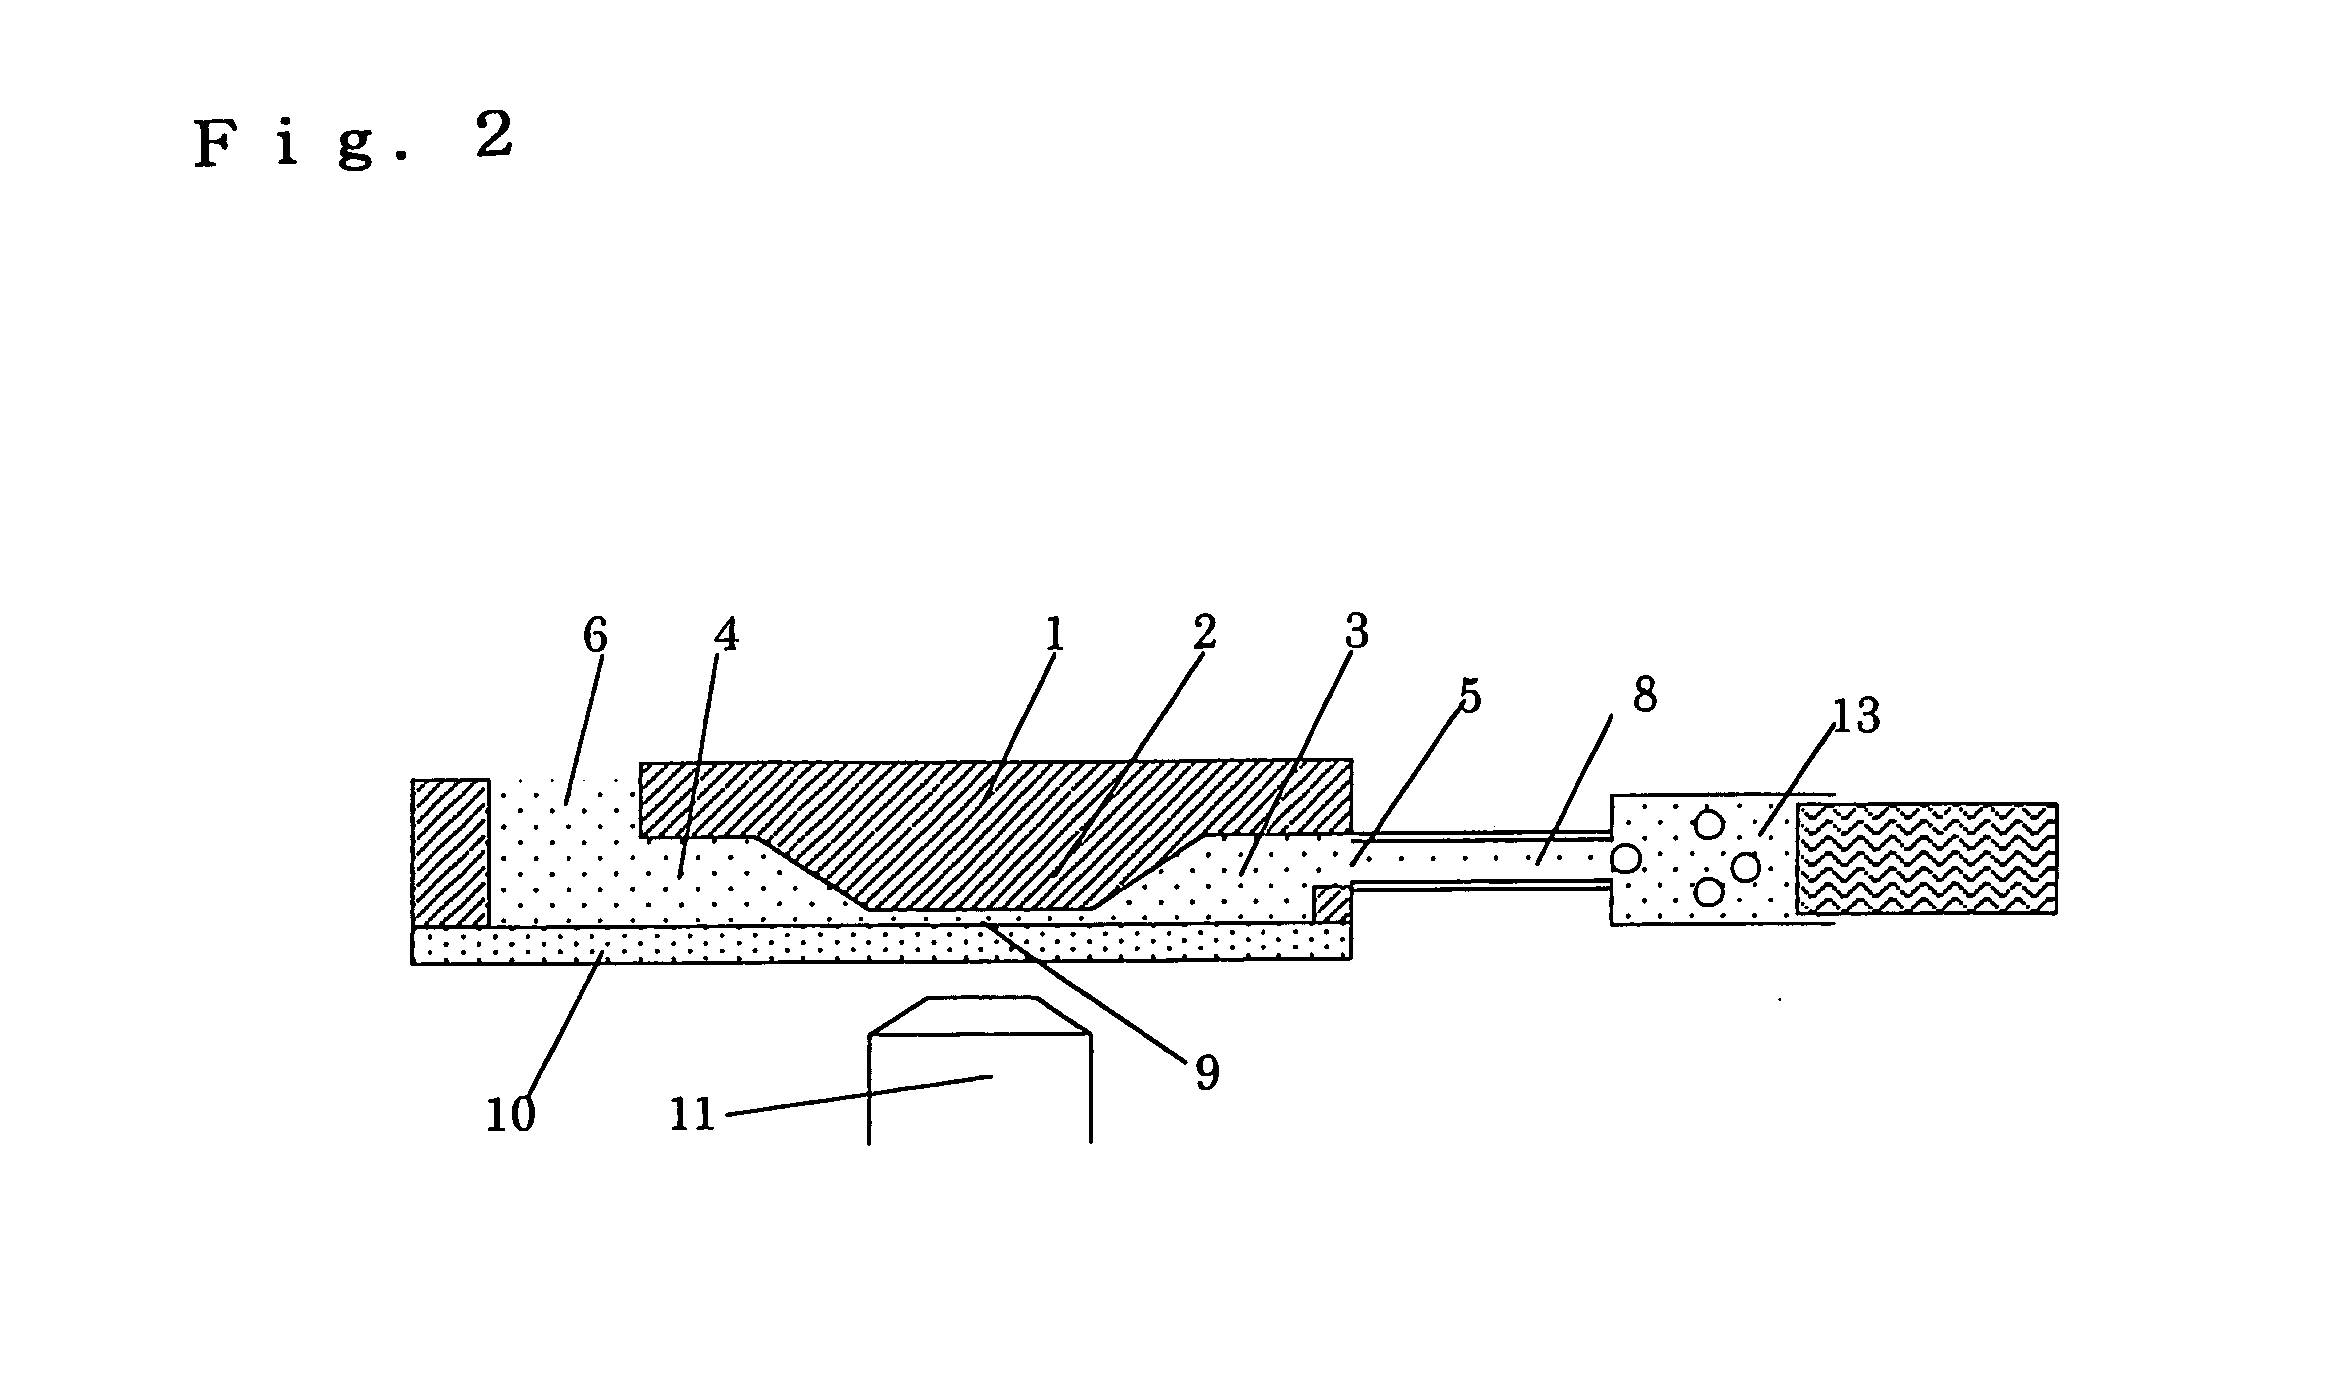 Apparatus for detecting cell chemotaxis